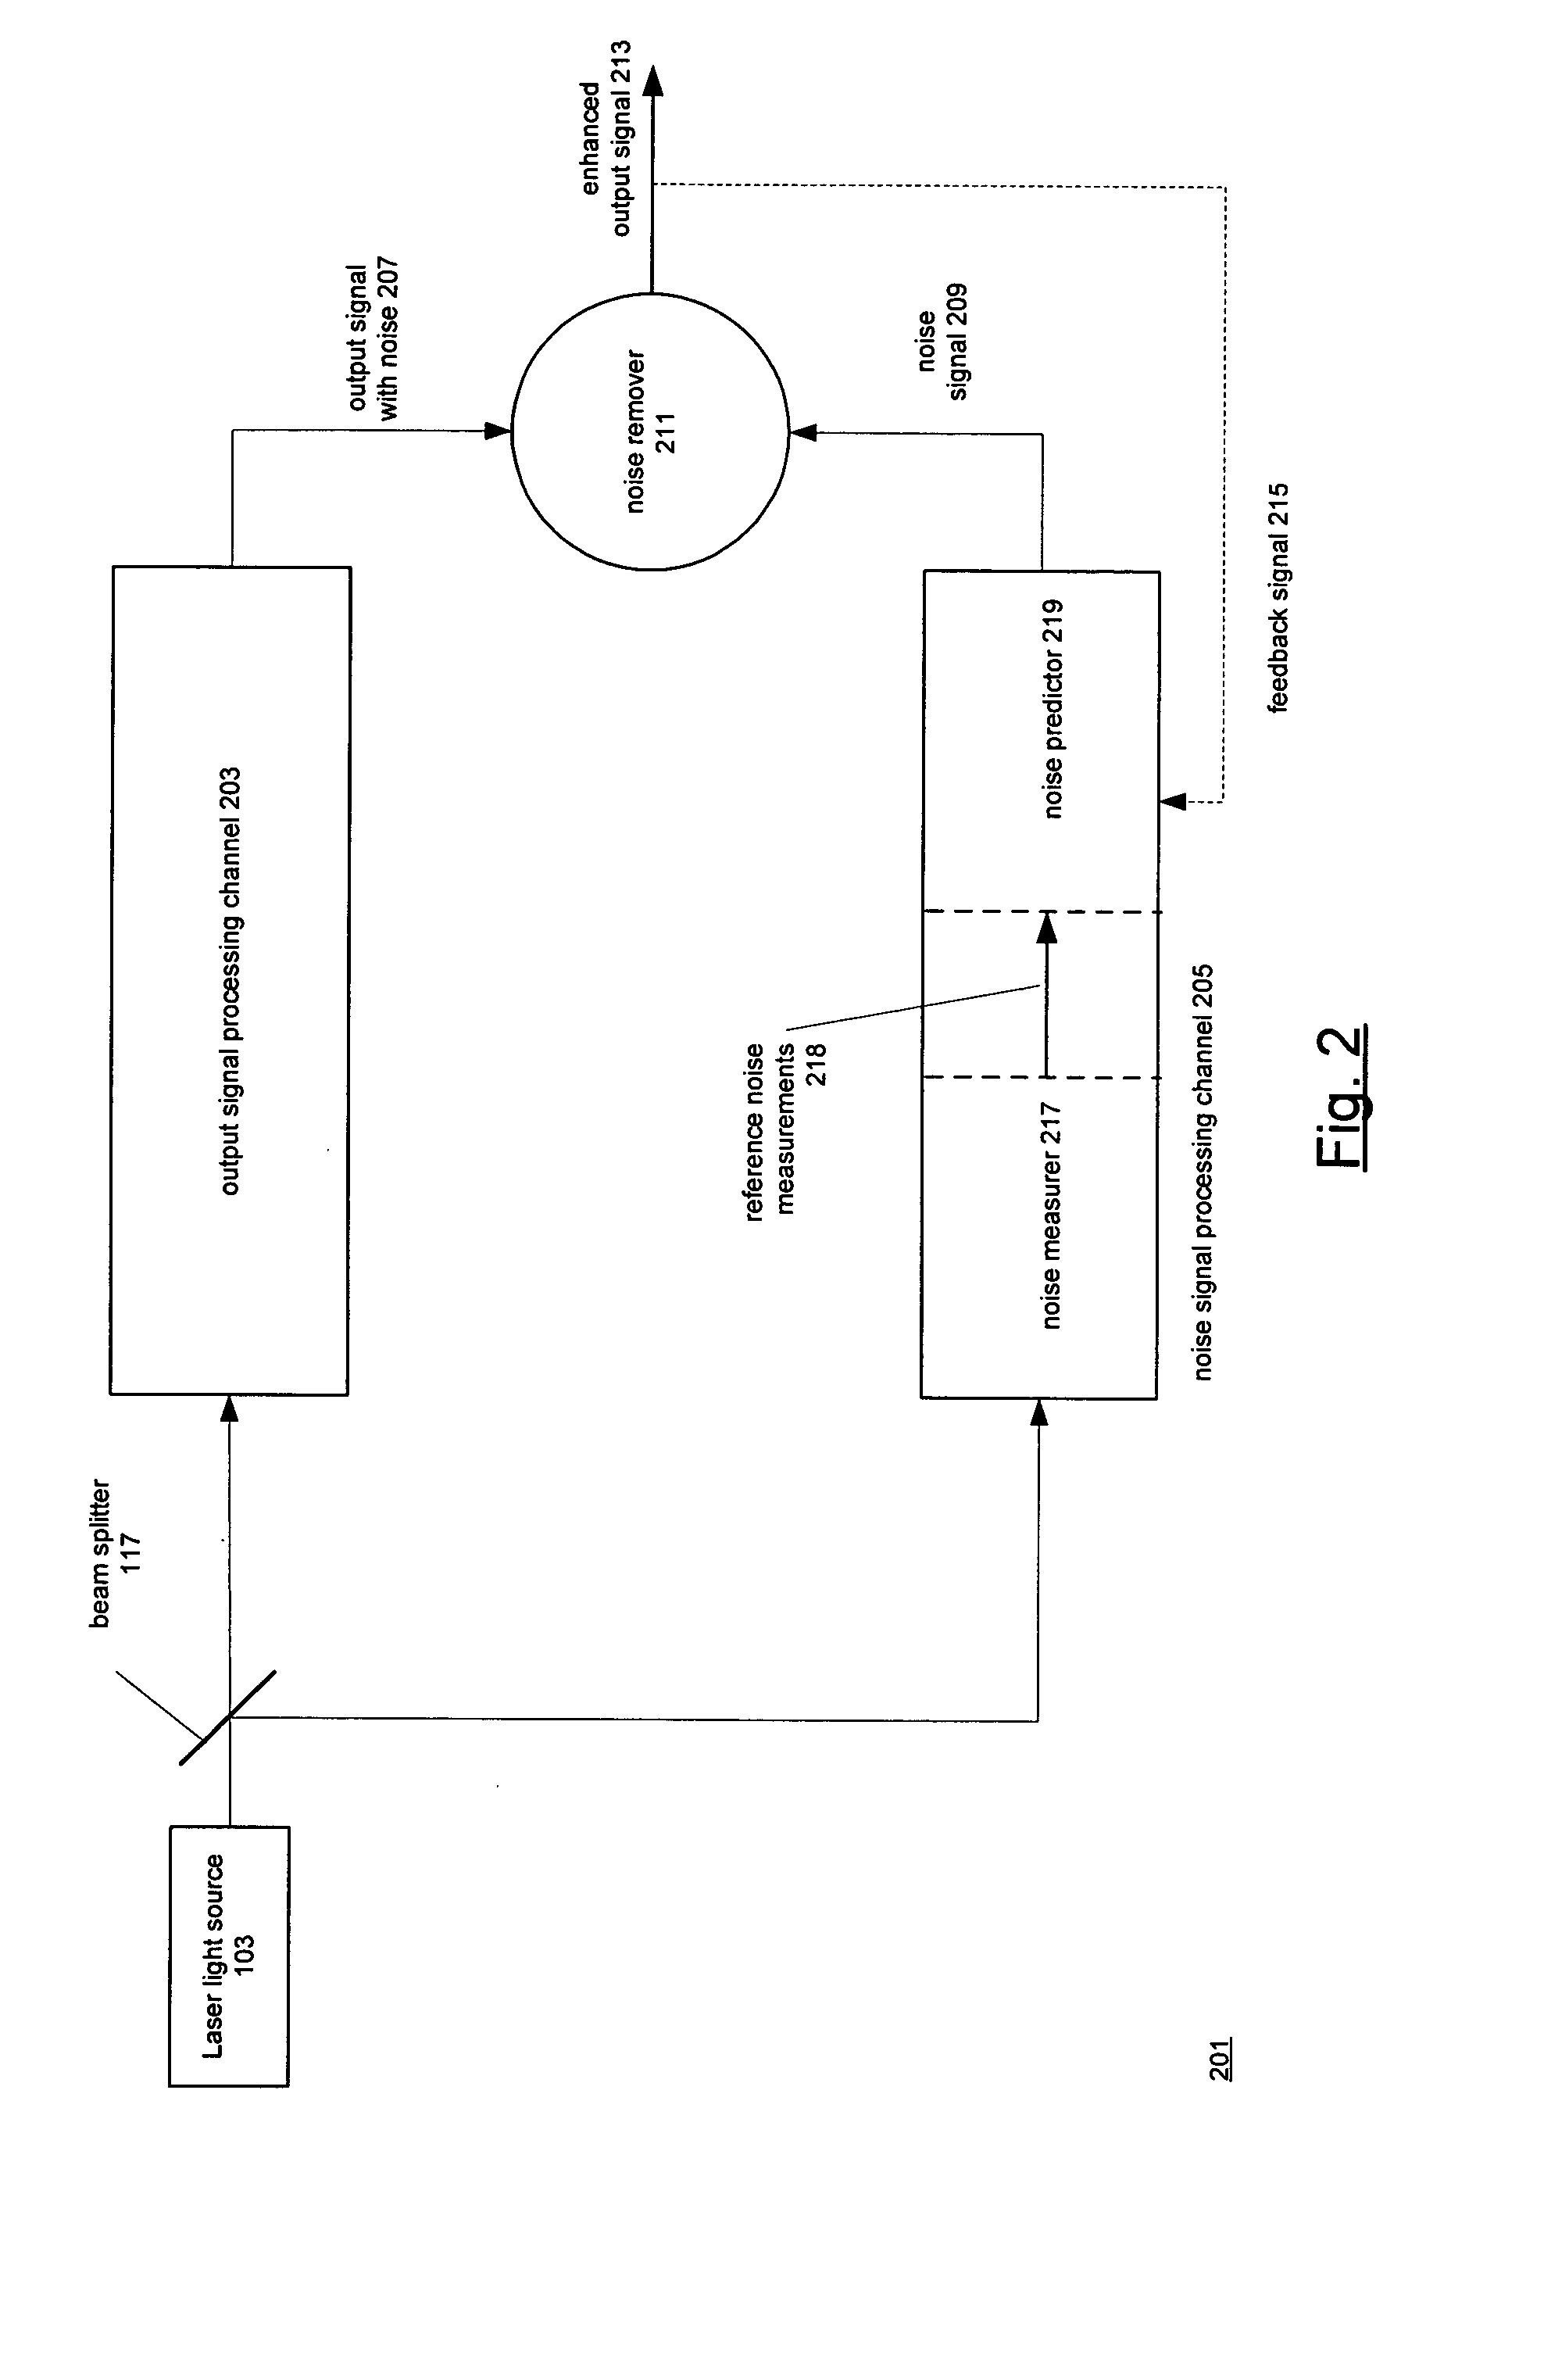 Apparatus for correcting for the effects of laser noise